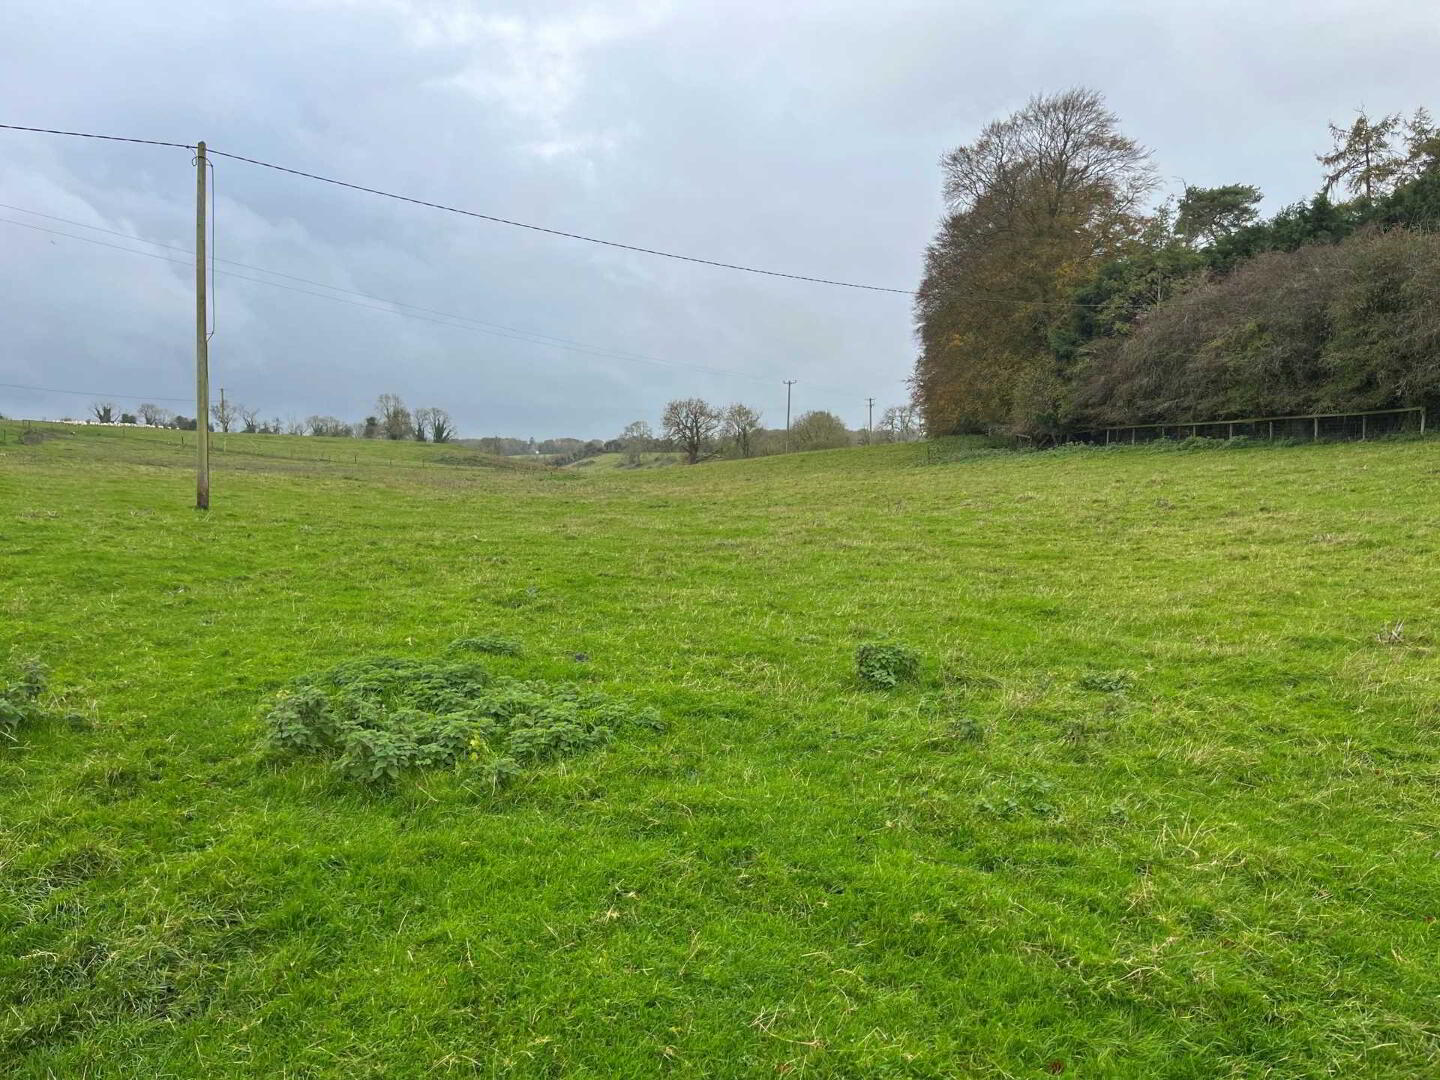 23 ACRES WITH 16 STABLES, Rathfeigh